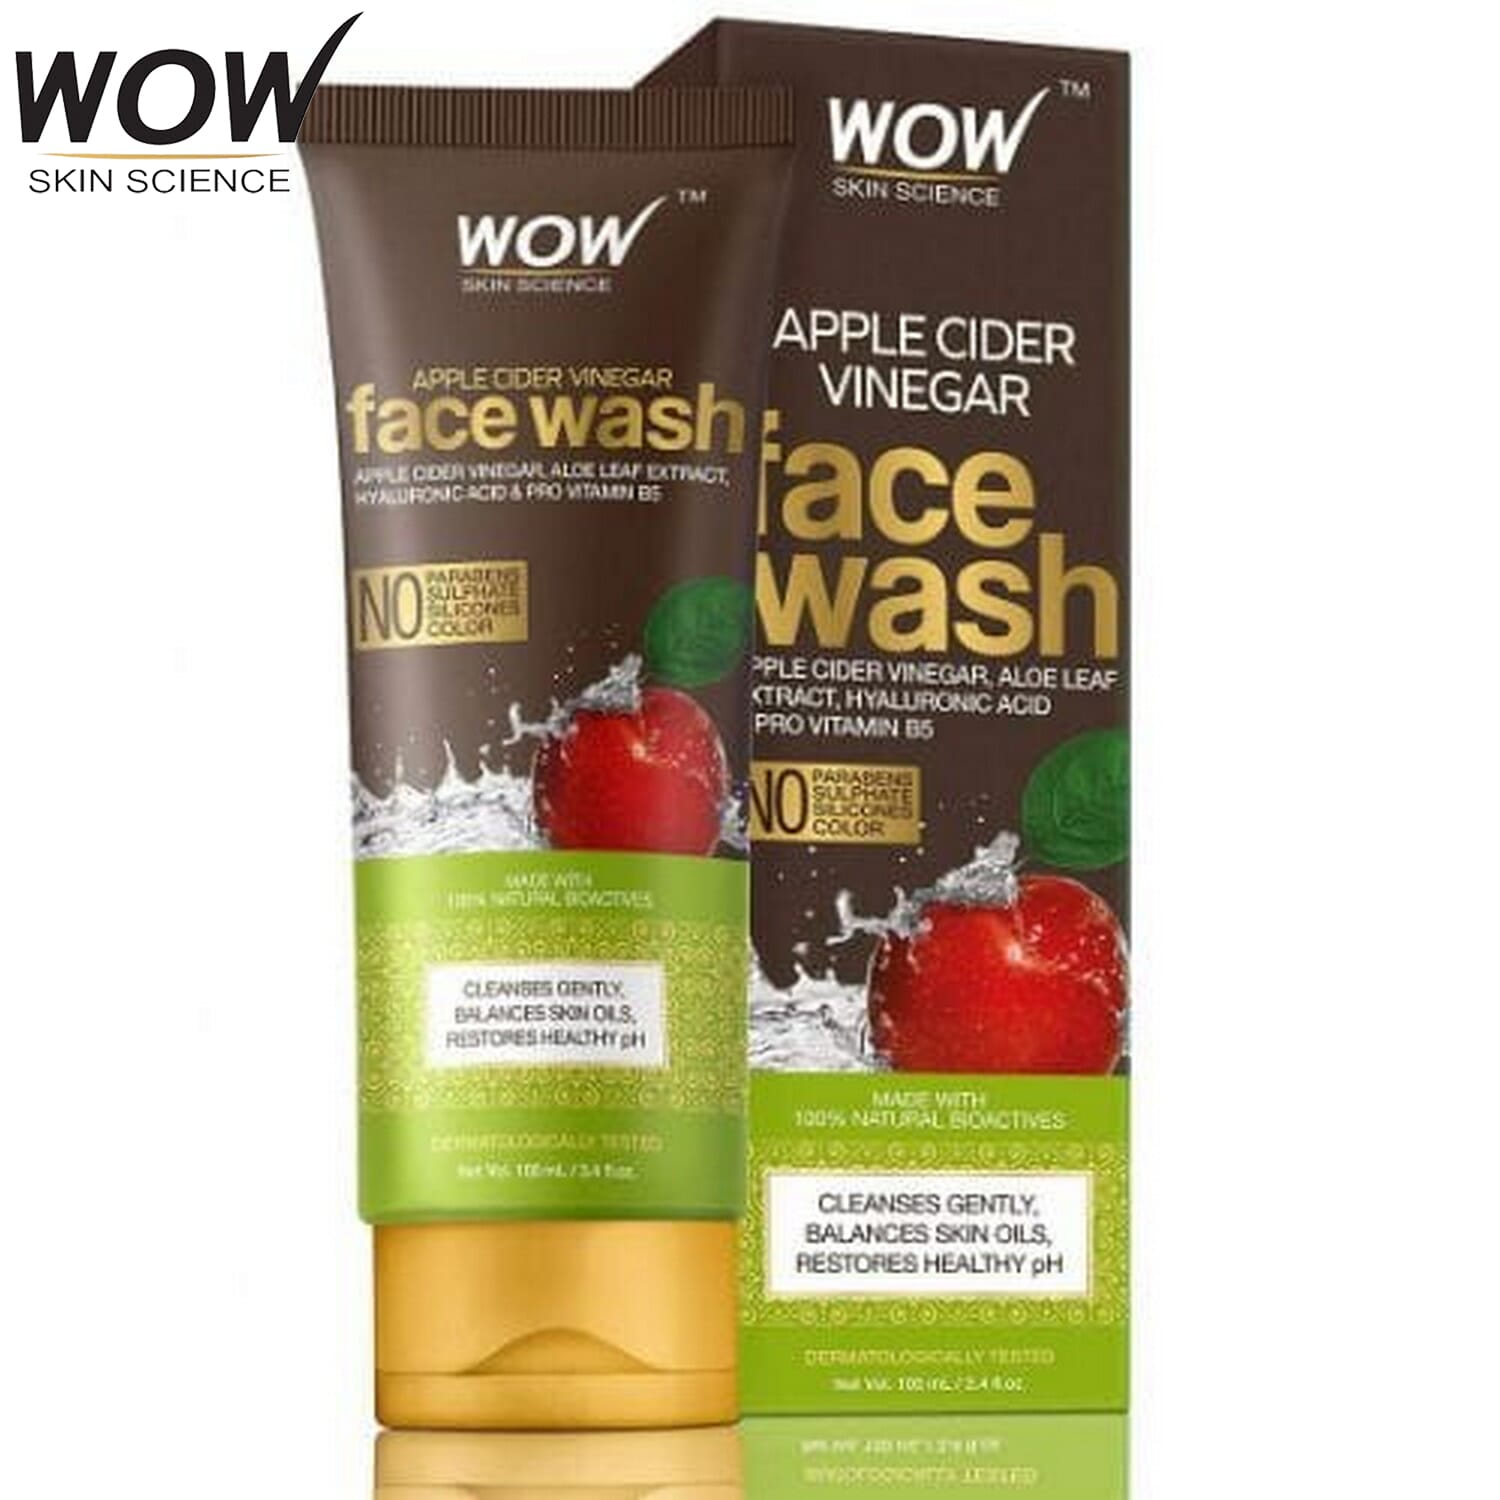 wow science apple cider vineger face wash 100ml